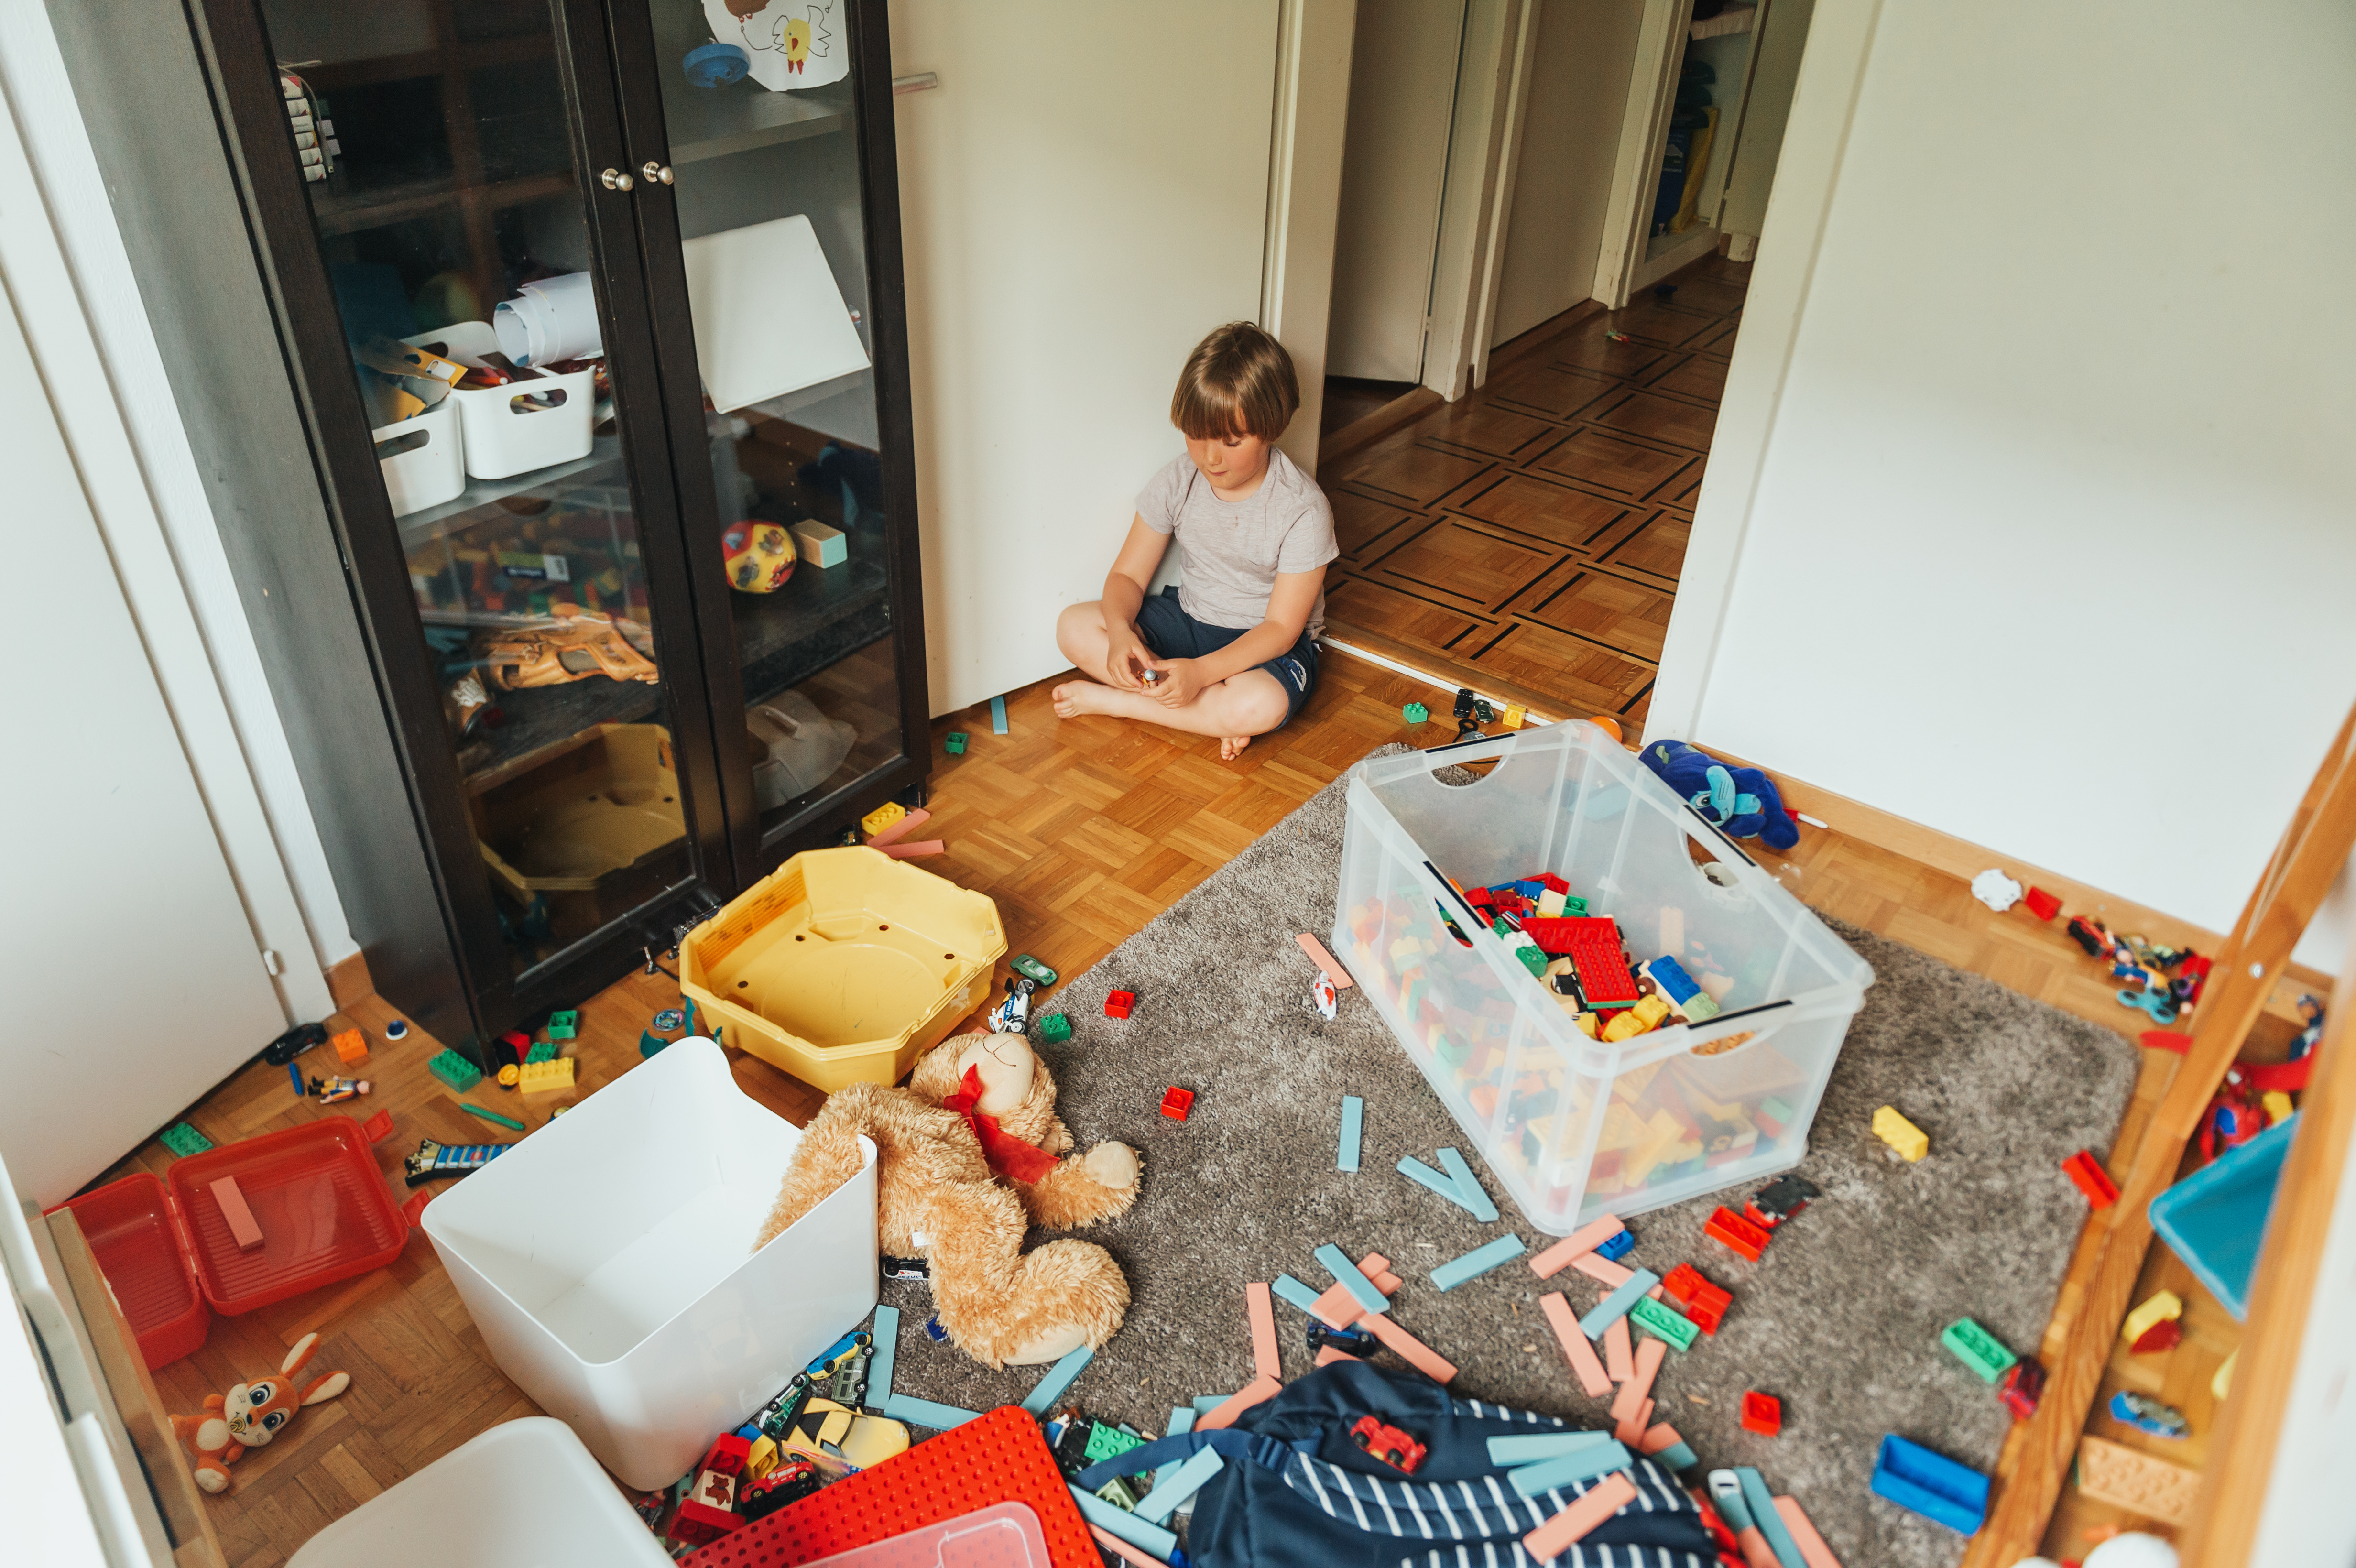 A child sitting in a messy room | Source: Shutterstock